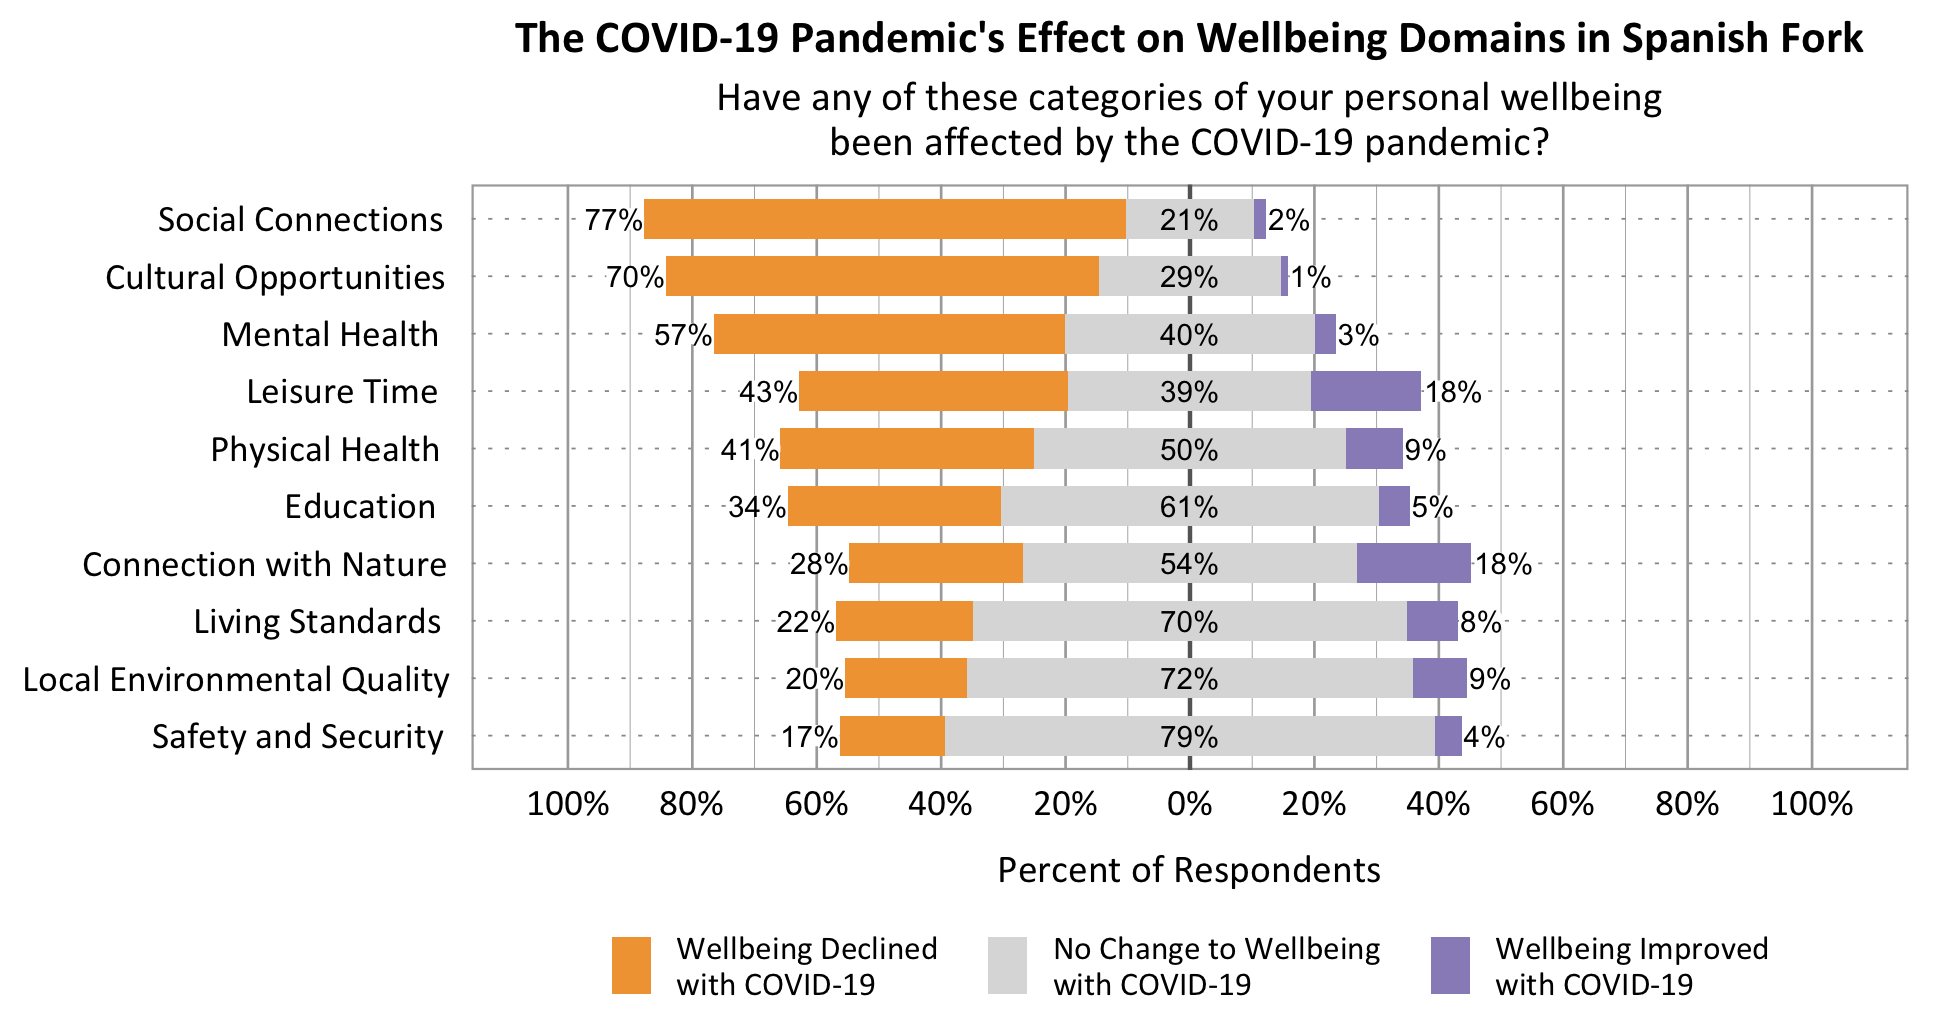 Likert Graph. Title: The COVID-19 Pandemic's effect on wellbeing domains in Spanish Fork. Subtitle: Have any of these categories of your personal wellbeing been affected by the COVID-19 pandemic? Data – Category: Social Connections- 77% of respondents rated wellbeing declined with COVID-19, 21% of respondents rated no change to wellbeing with COVID-19, 2% of respondents rated wellbeing improved with COVI-19; Category: Cultural Opportunities- 70% of respondents rated wellbeing declined with COVID-19, 29% of respondents rated no change to wellbeing with COVID-19, 1% of respondents rated wellbeing improved with COVID-19; Category: Mental Health- 57% of respondents rated wellbeing declined with COVID-19, 40% of respondents rated no change to wellbeing with COVID-19, 3% of respondents rated wellbeing improved with COVID-19; Category: Leisure Time- 43% of respondents rated wellbeing declined with COVID-19, 39% of respondents rated no change to wellbeing with COVID-19, 18% of respondents rated wellbeing improved with COVID-19; Category: Physical Health - 41% of respondents rated wellbeing declined with COVID-19, 50% of respondents rated no change to wellbeing with COVID-19, 9% of respondents rated wellbeing improved with COVID-19; Category: Connection with Nature- 28% of respondents rated wellbeing declined with COVID-19, 54% of respondents rated no change to wellbeing with COVID-19, 18% of respondents rated wellbeing improved with COVID-19; Category: Education- 34% of respondents rated wellbeing declined with COVID-19, 61% of respondents rated no change to wellbeing with COVID-19, 5% of respondents rated wellbeing improved with COVID-19; Category: Living Standards- 22% of respondents rated wellbeing declined with COVID-19, 70% of respondents rated no change to wellbeing with COVID-19, 8% of respondents rated wellbeing improved with COVID-19; Category:  Local Environmental Quality- 20% of respondents rated wellbeing declined with COVID-19, 72% of respondents rated no change to wellbeing with COVID-19, 9% of respondents rated wellbeing improved with COVID-19; Category: Safety and Security- 17% of respondents rated wellbeing declined with COVID-19, 79% of respondents rated no change to wellbeing with COVID-19, 4% of respondents rated wellbeing improved with COVID-19.